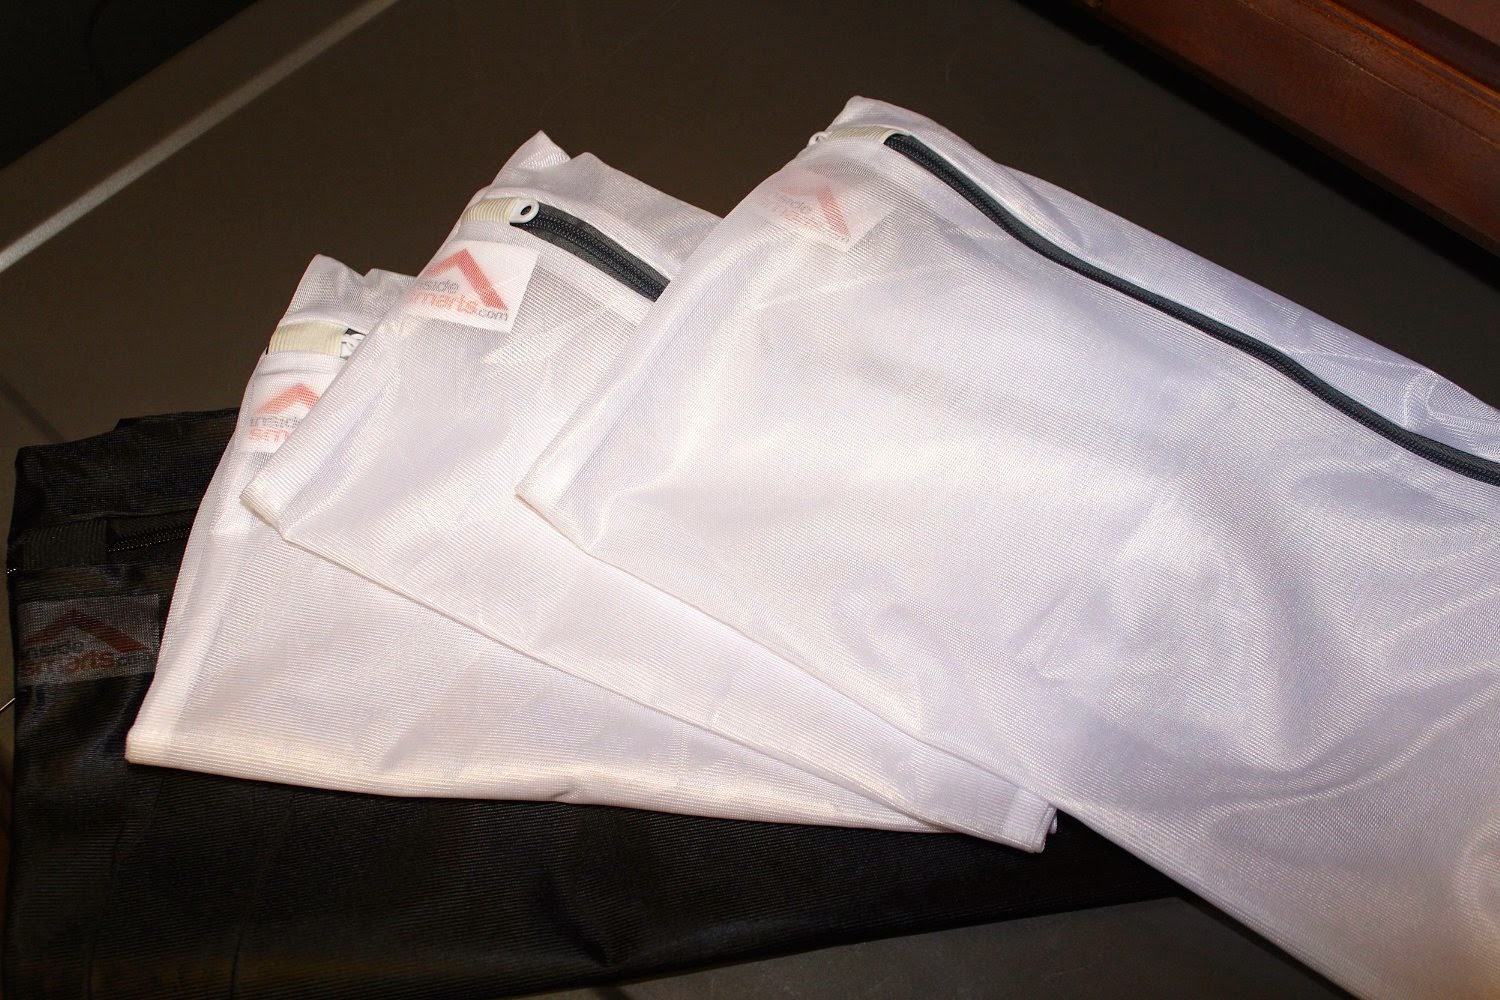 heART: PRODUCT REVIEW: Delicates Laundry Zip-close Bags, by Inside ...